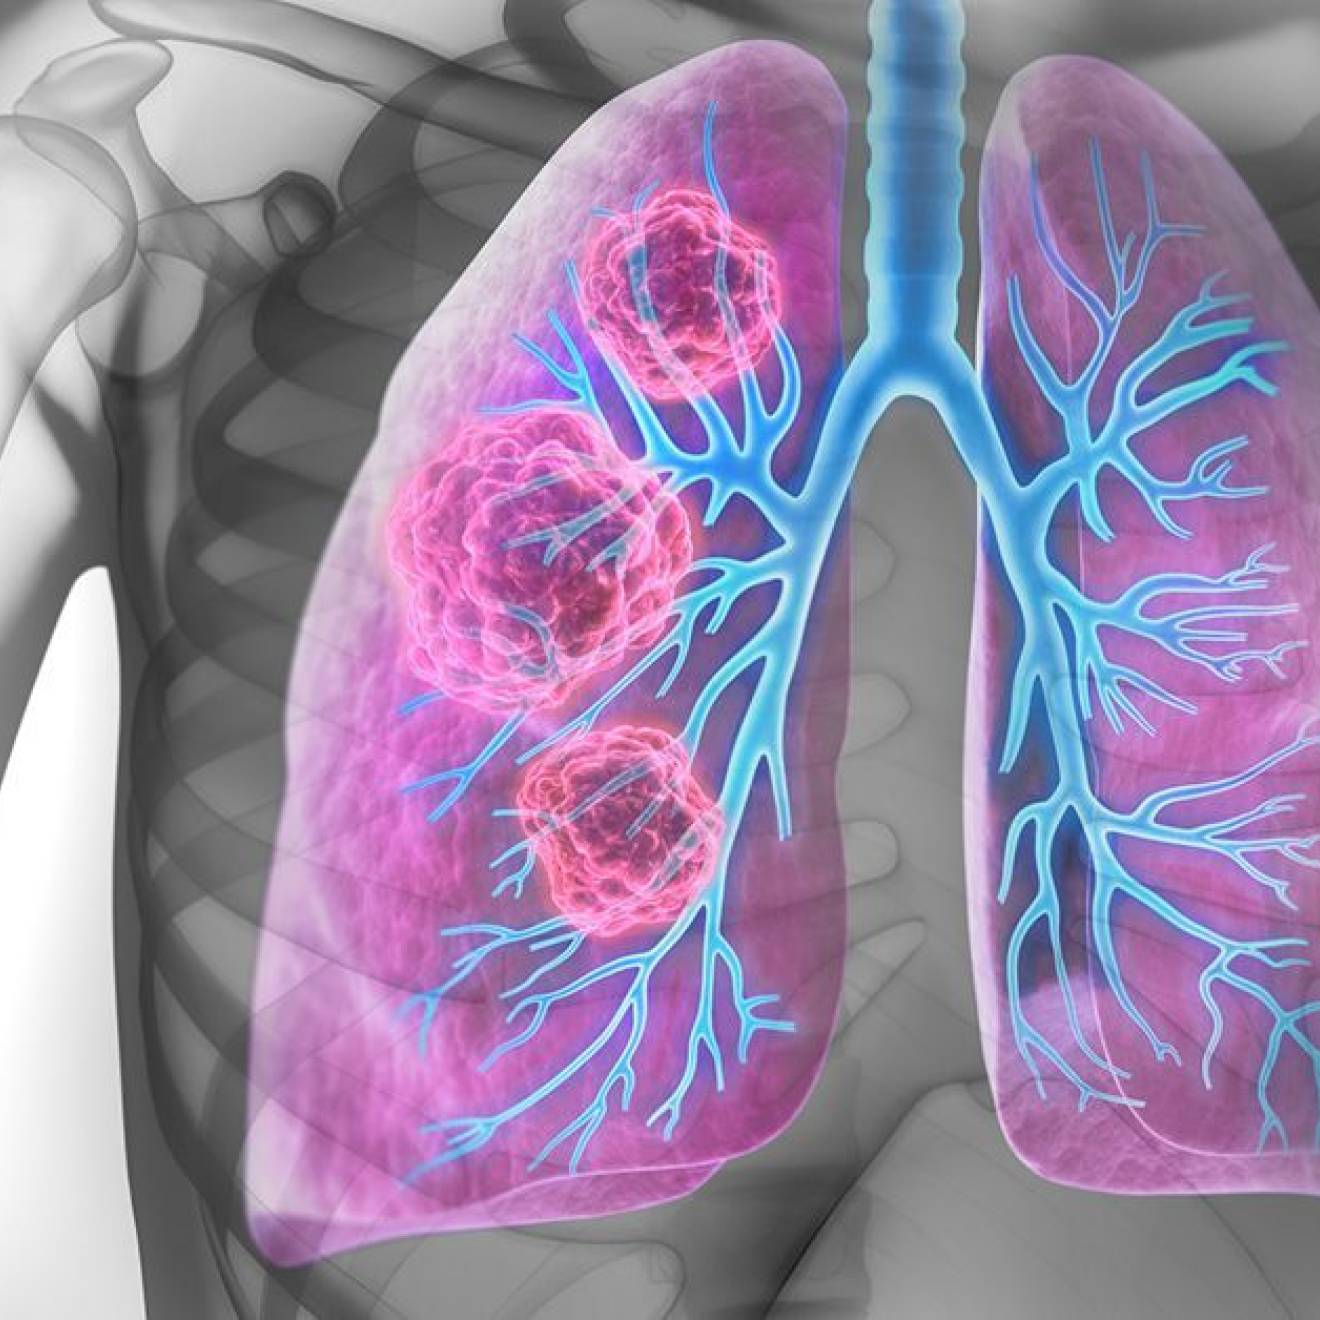 Visualization that looks like an X-ray with pink and blue lungs